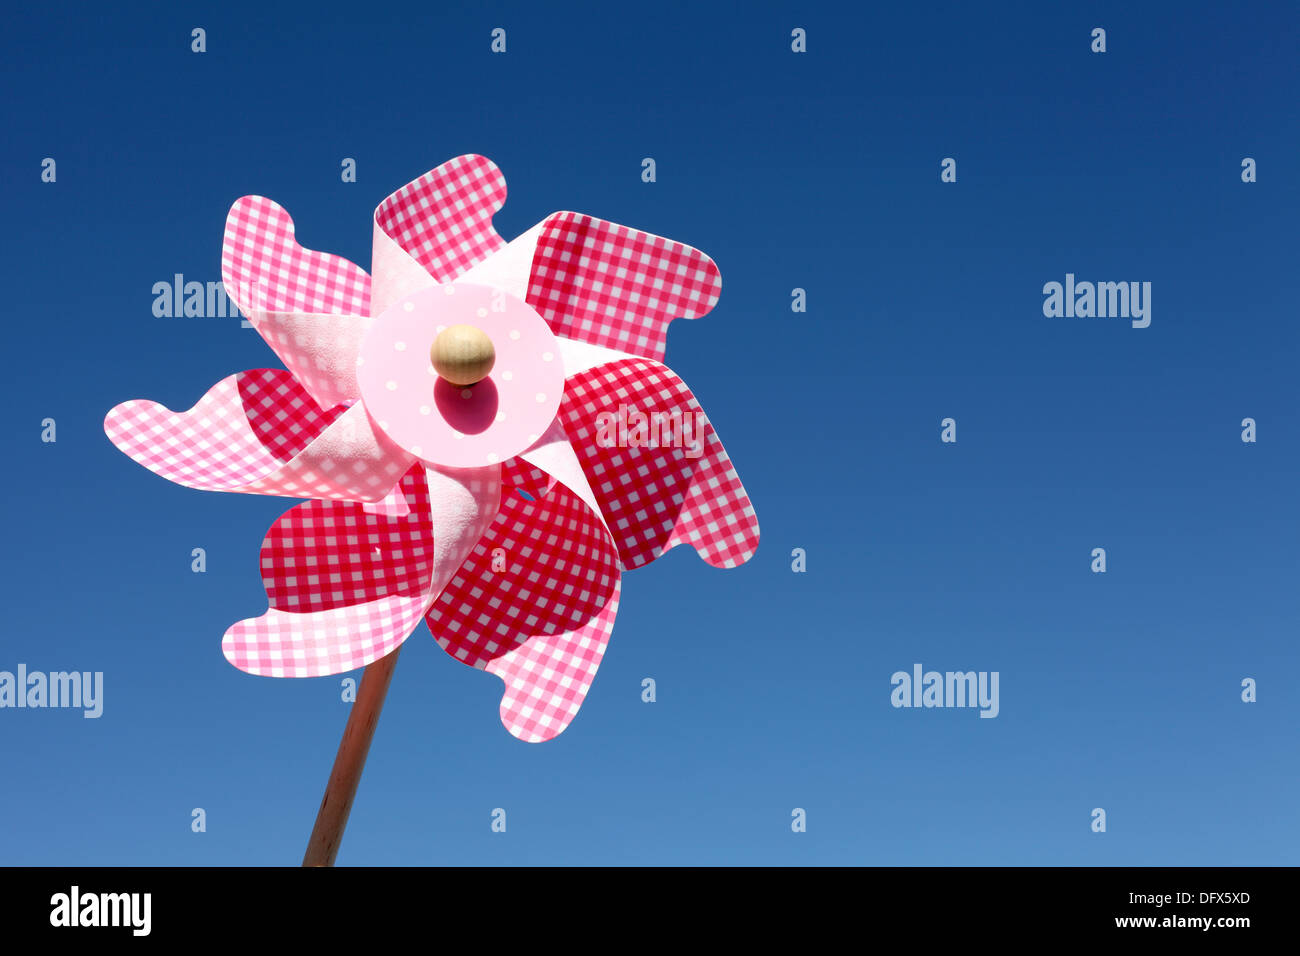 Colorful toy pinwheel against clear blue sky Stock Photo